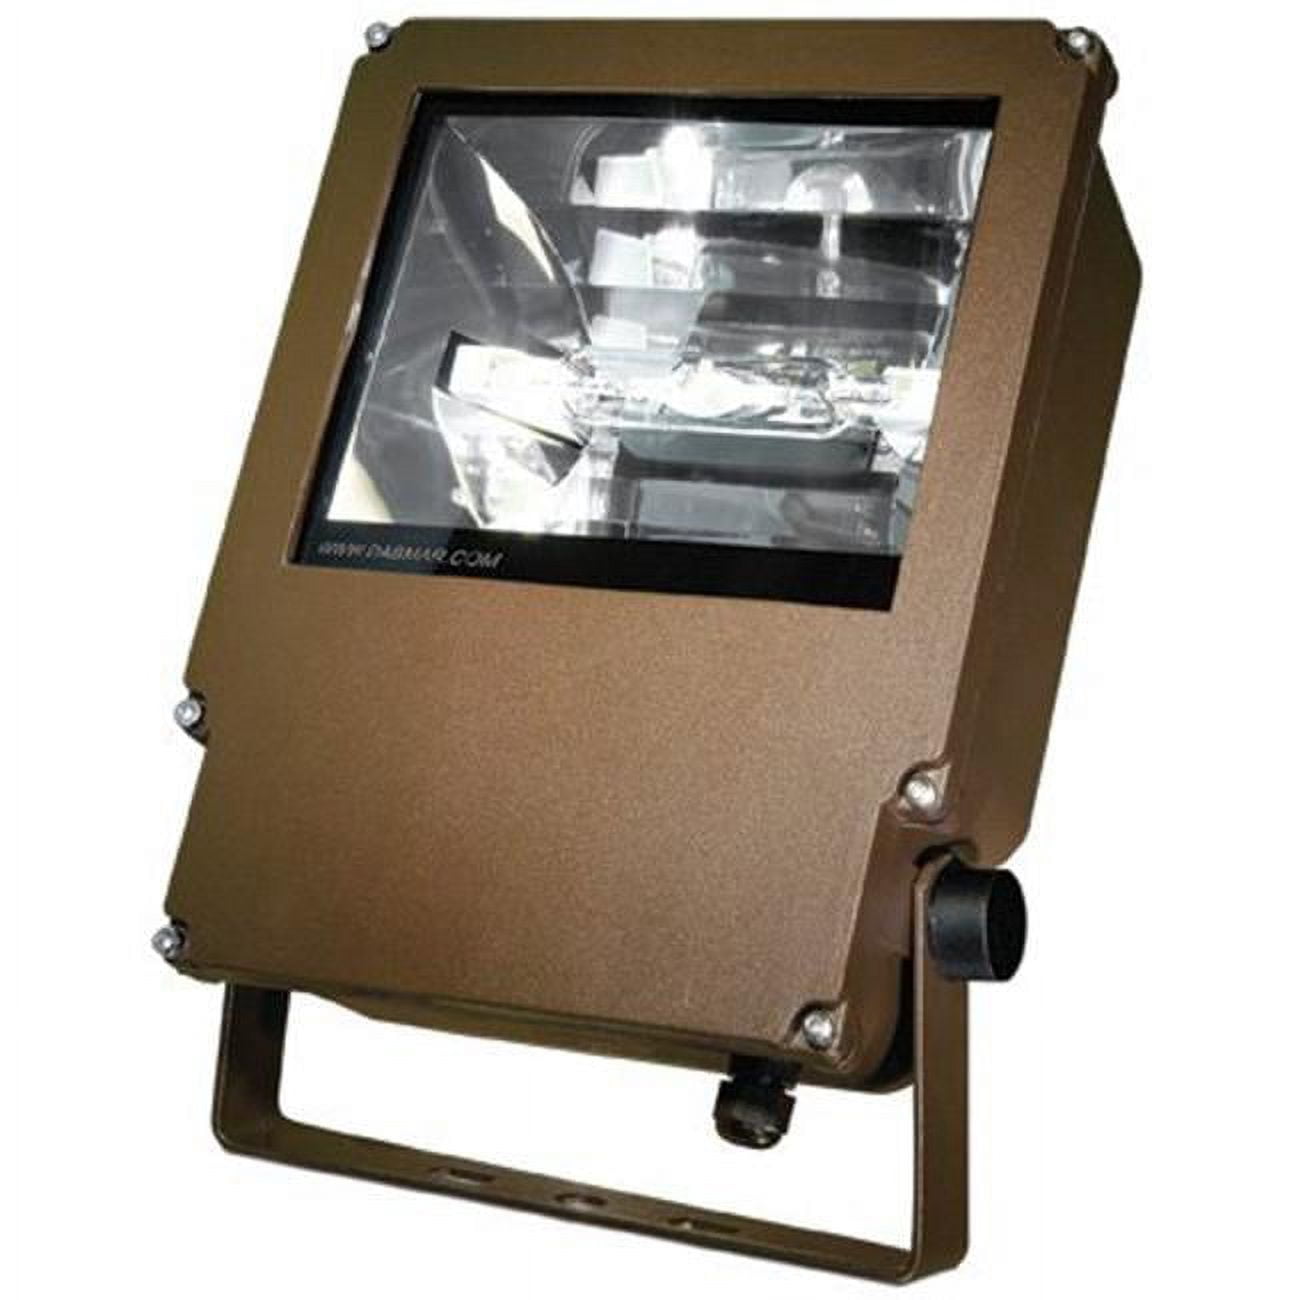 12.90 X 9 X 3.50 In. 120-277 V 70 Watts Powder Coated Cast Aluminum Medium Hid Flood Fixture Light With Double Ended Metal Halide Lamp, Bronze